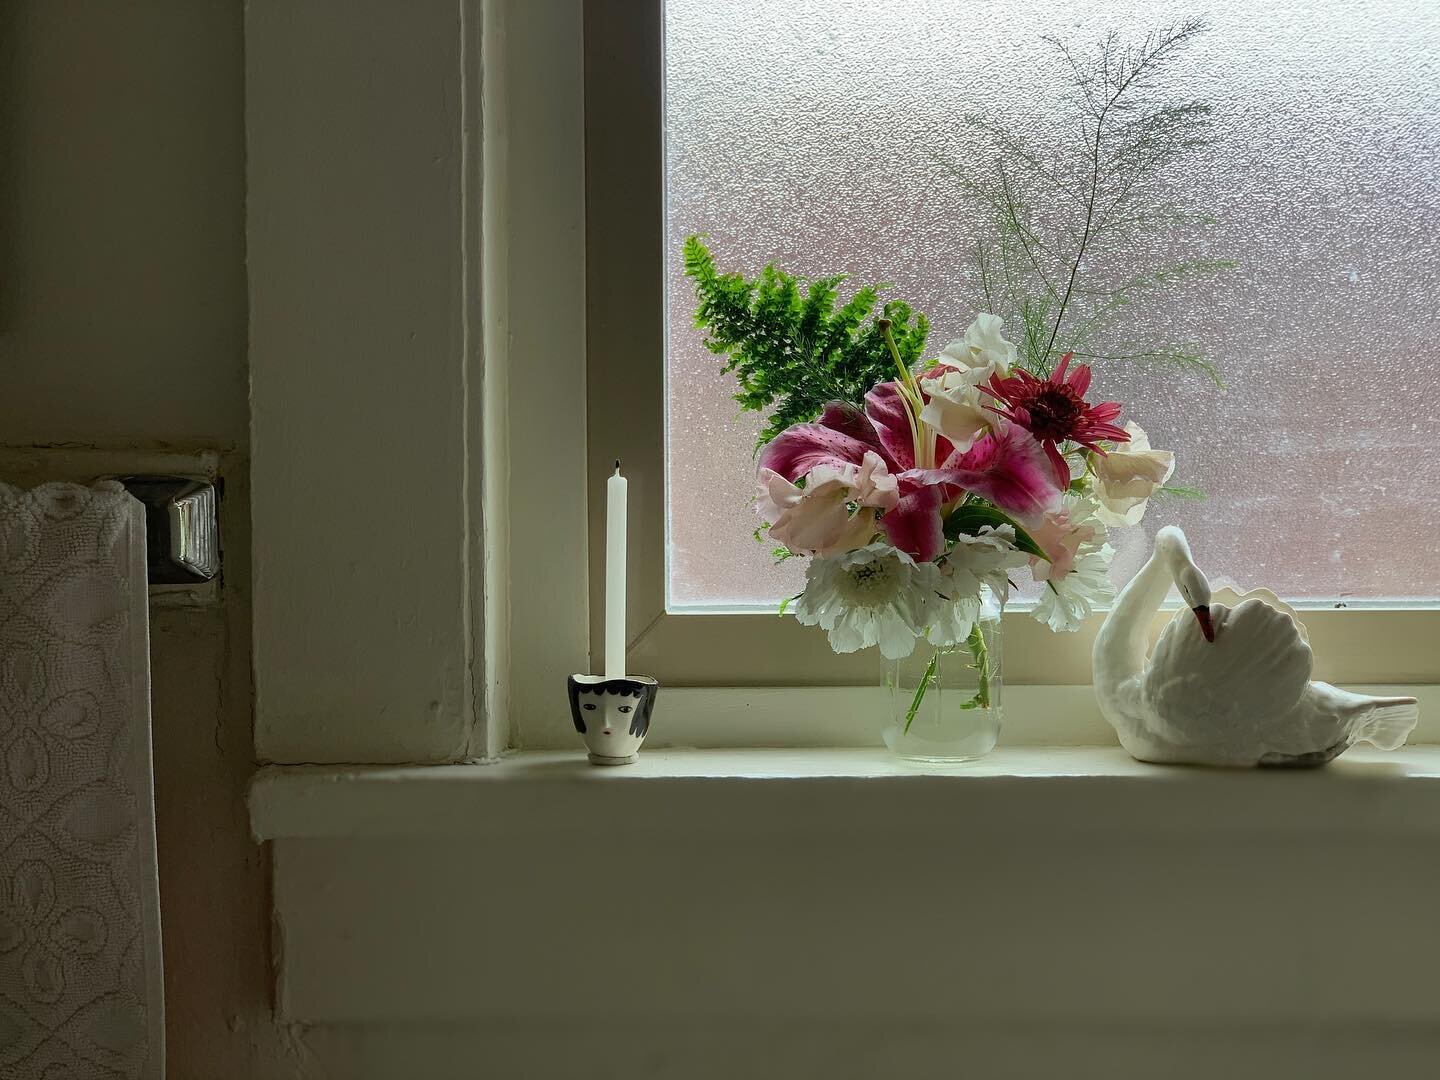 These flowers from @badweatherurbanfarm are bringing the sunshine to this moody weekend. They are sitting on the window sill in my bathroom and I get lost in all those ruffles each time I wash my hands. I am not mad about it.

I spent some time at th